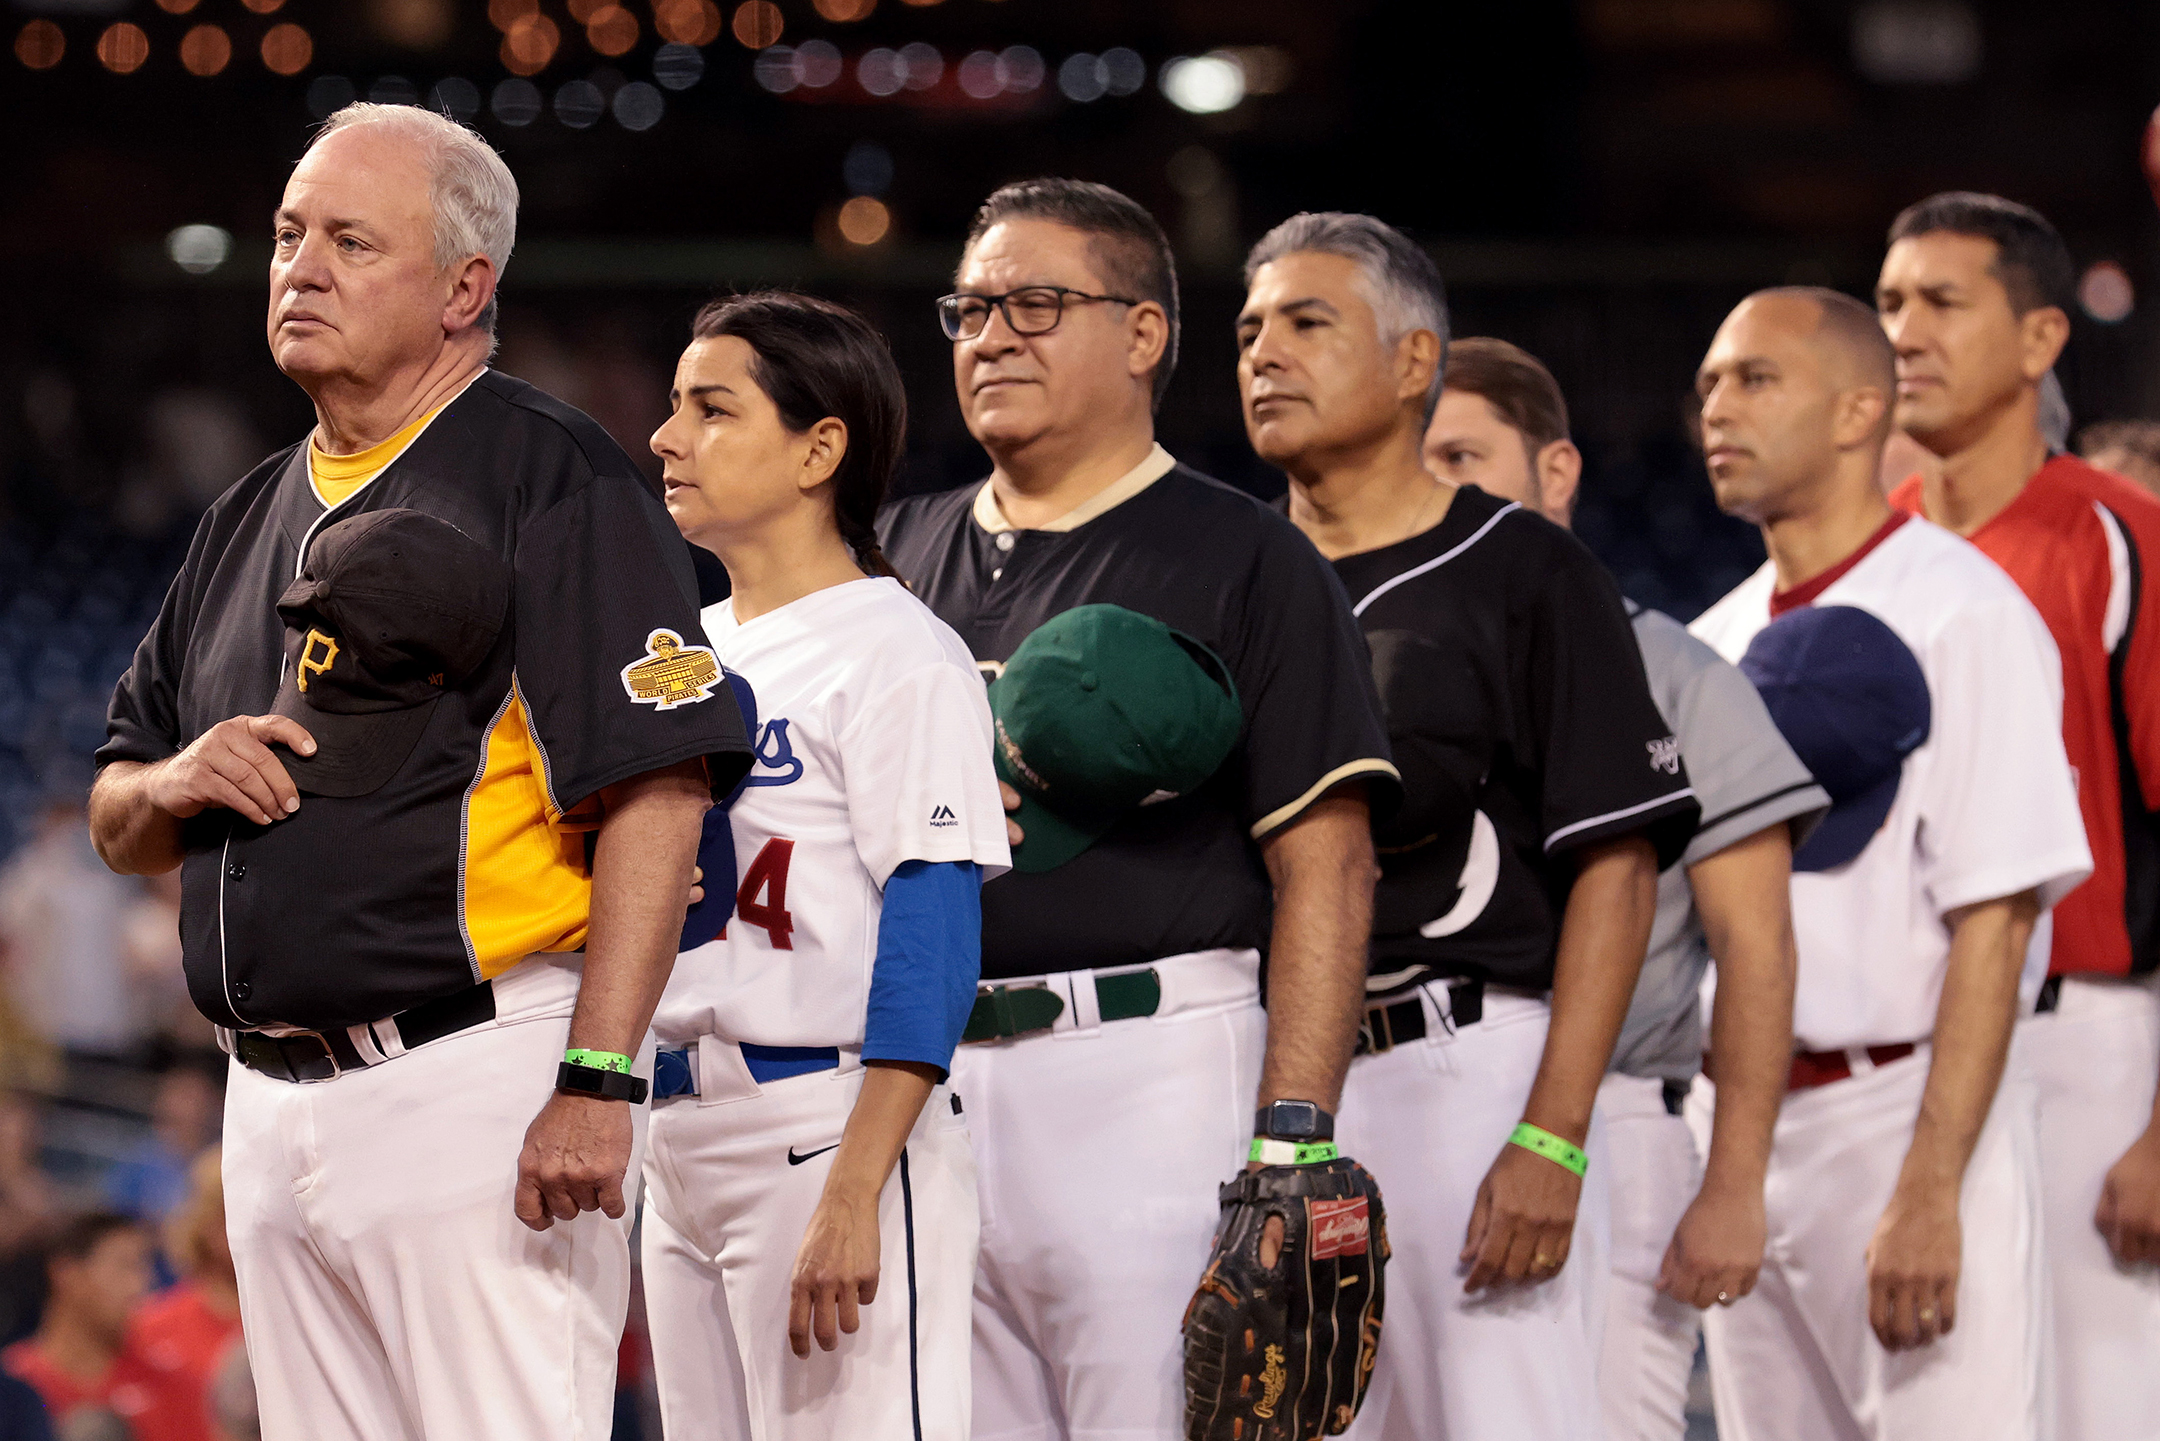 Row of seven congresspeople in baseball uniforms saluting the National Anthem